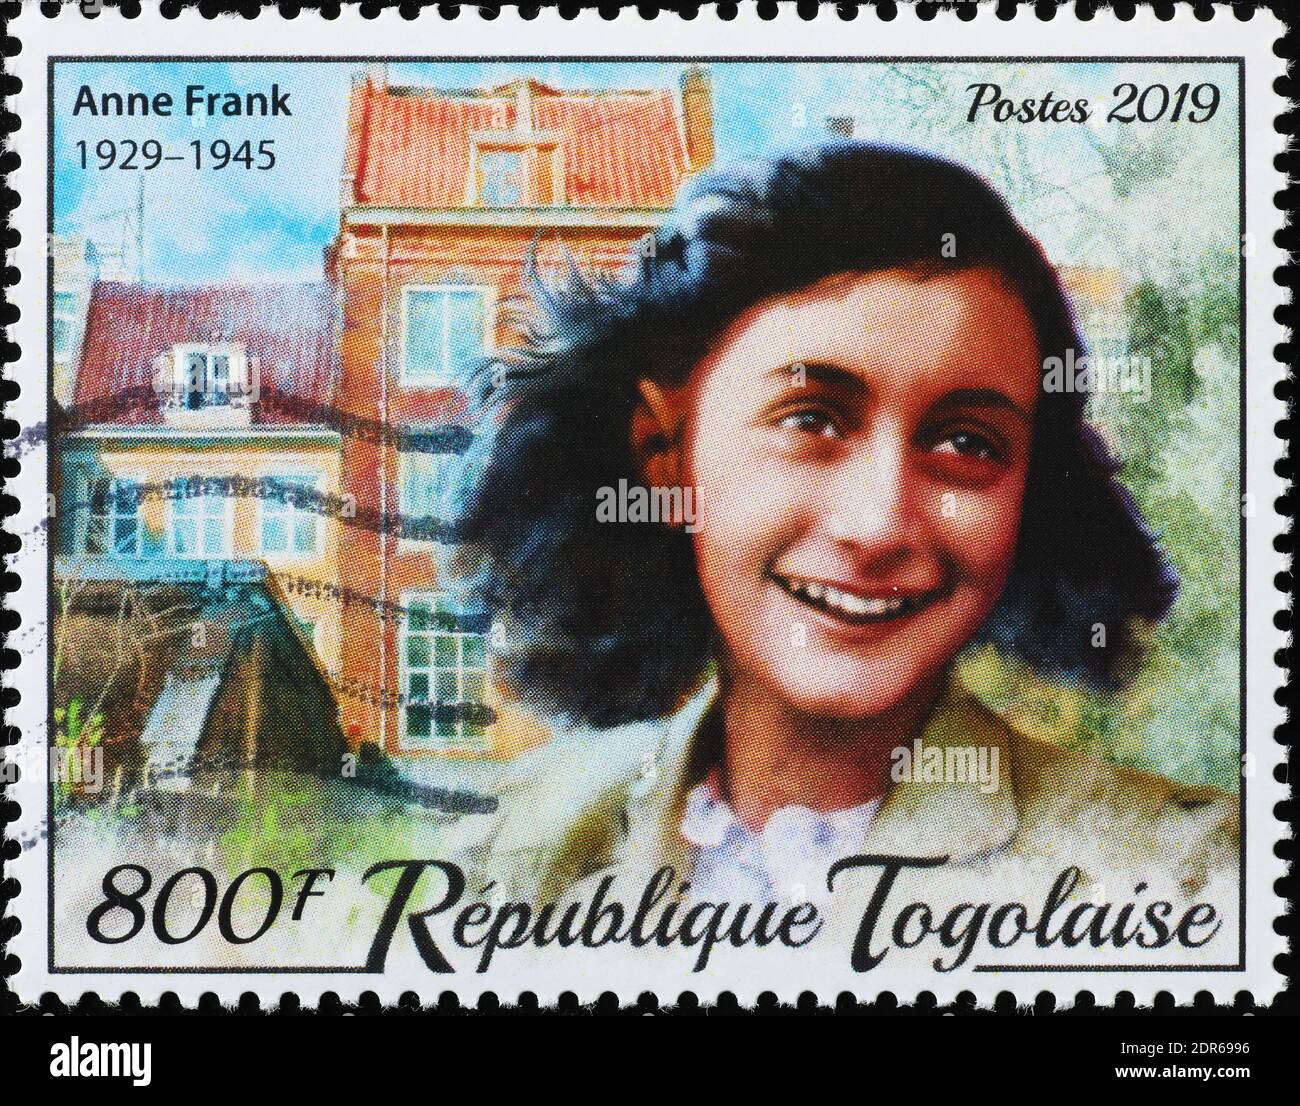 Anna Frank and her house on postage stamp Stock Photo